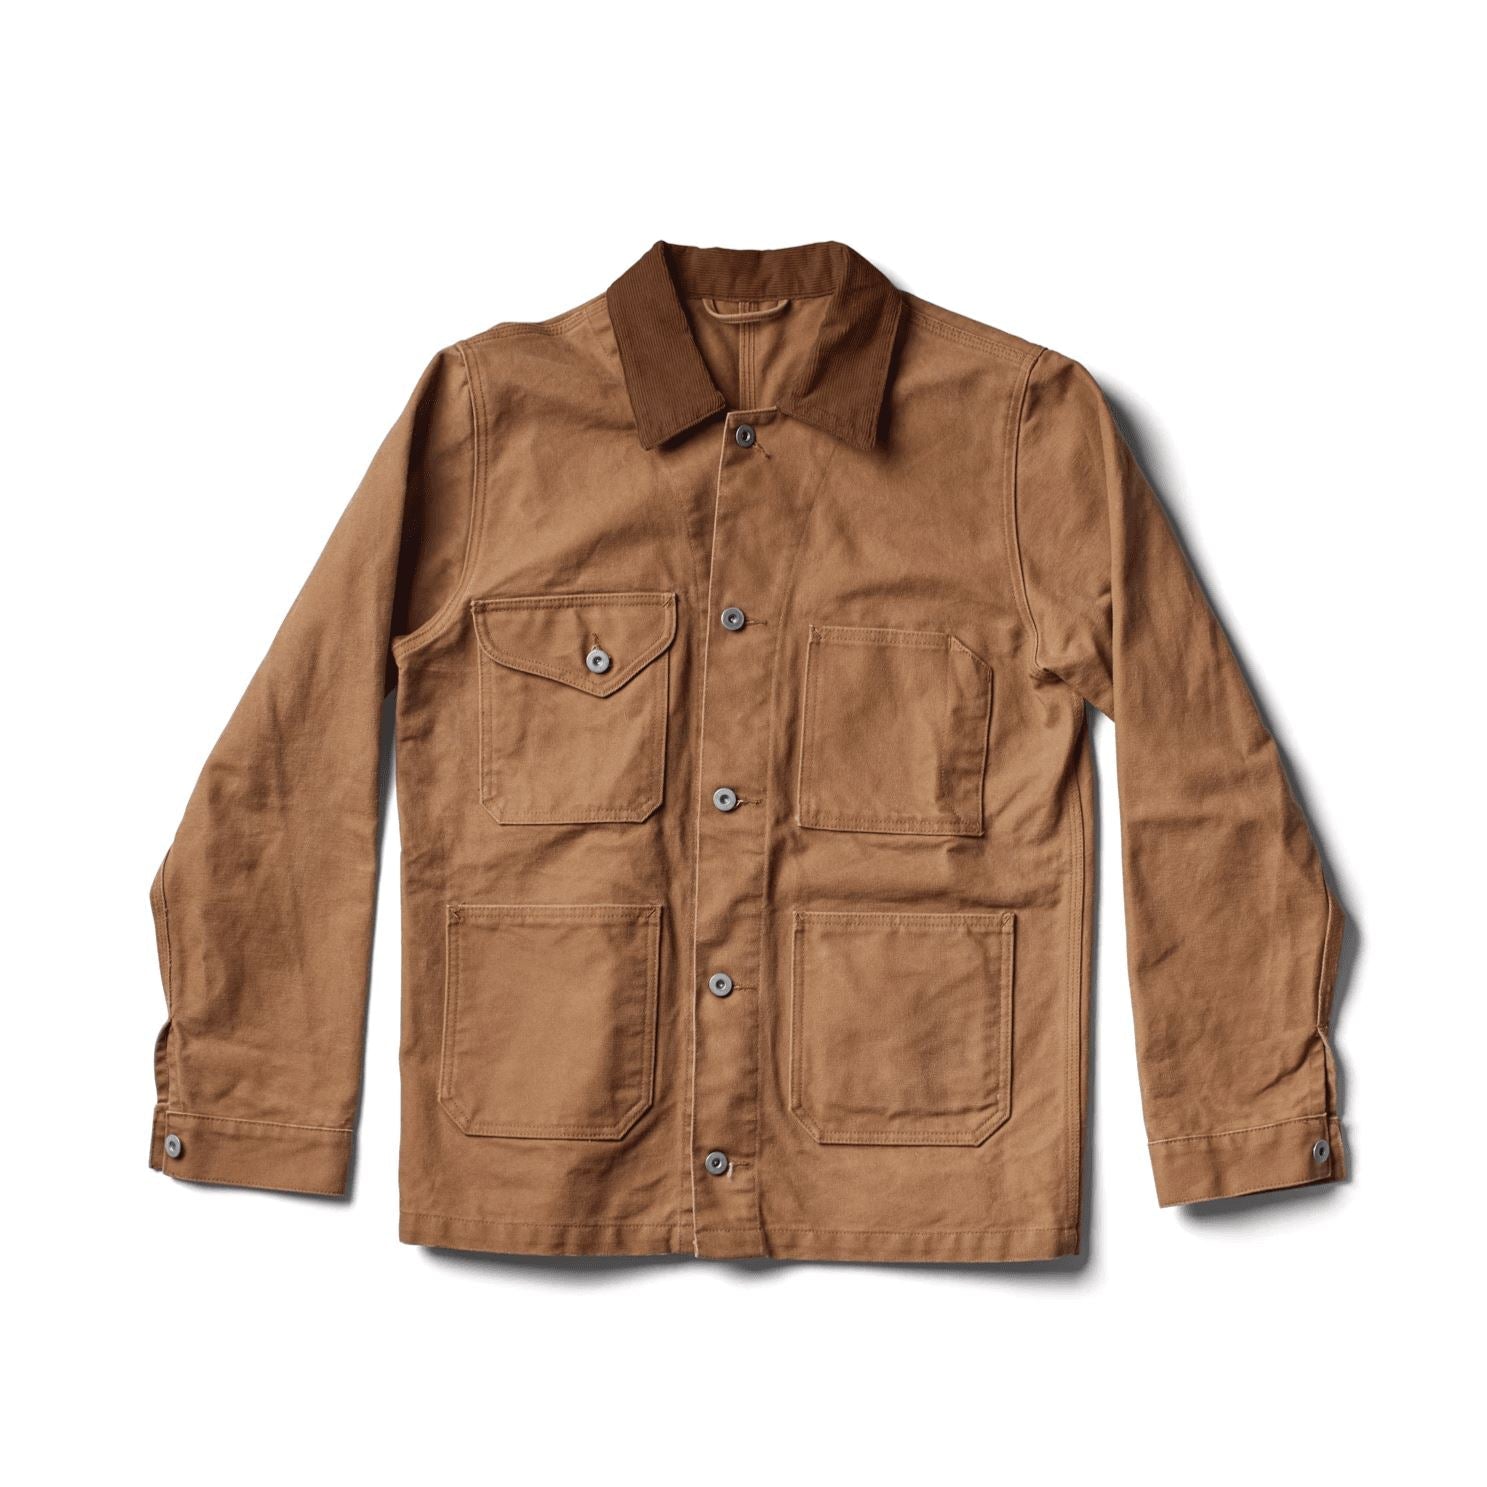 Heartland Jacket - State-side Canvas - grown&sewn